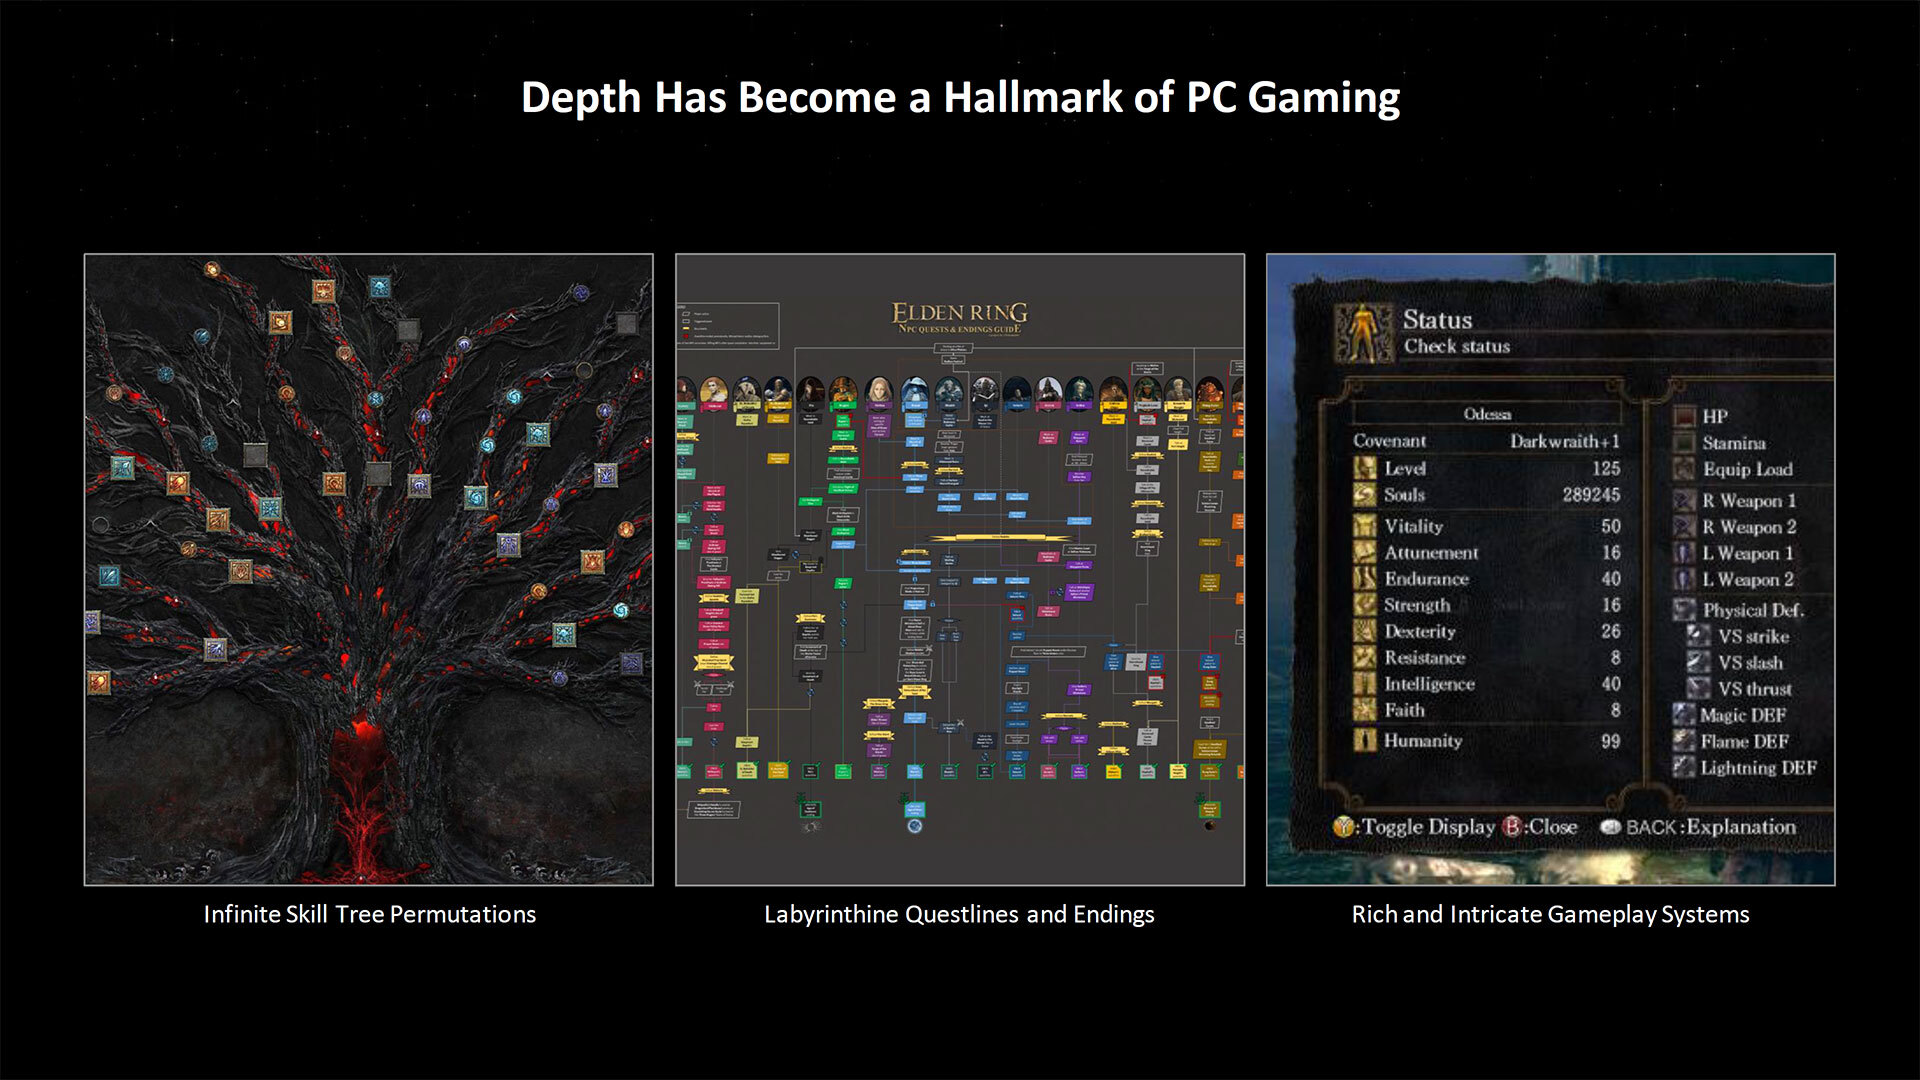 Depth has become a hallmark of PC gaming